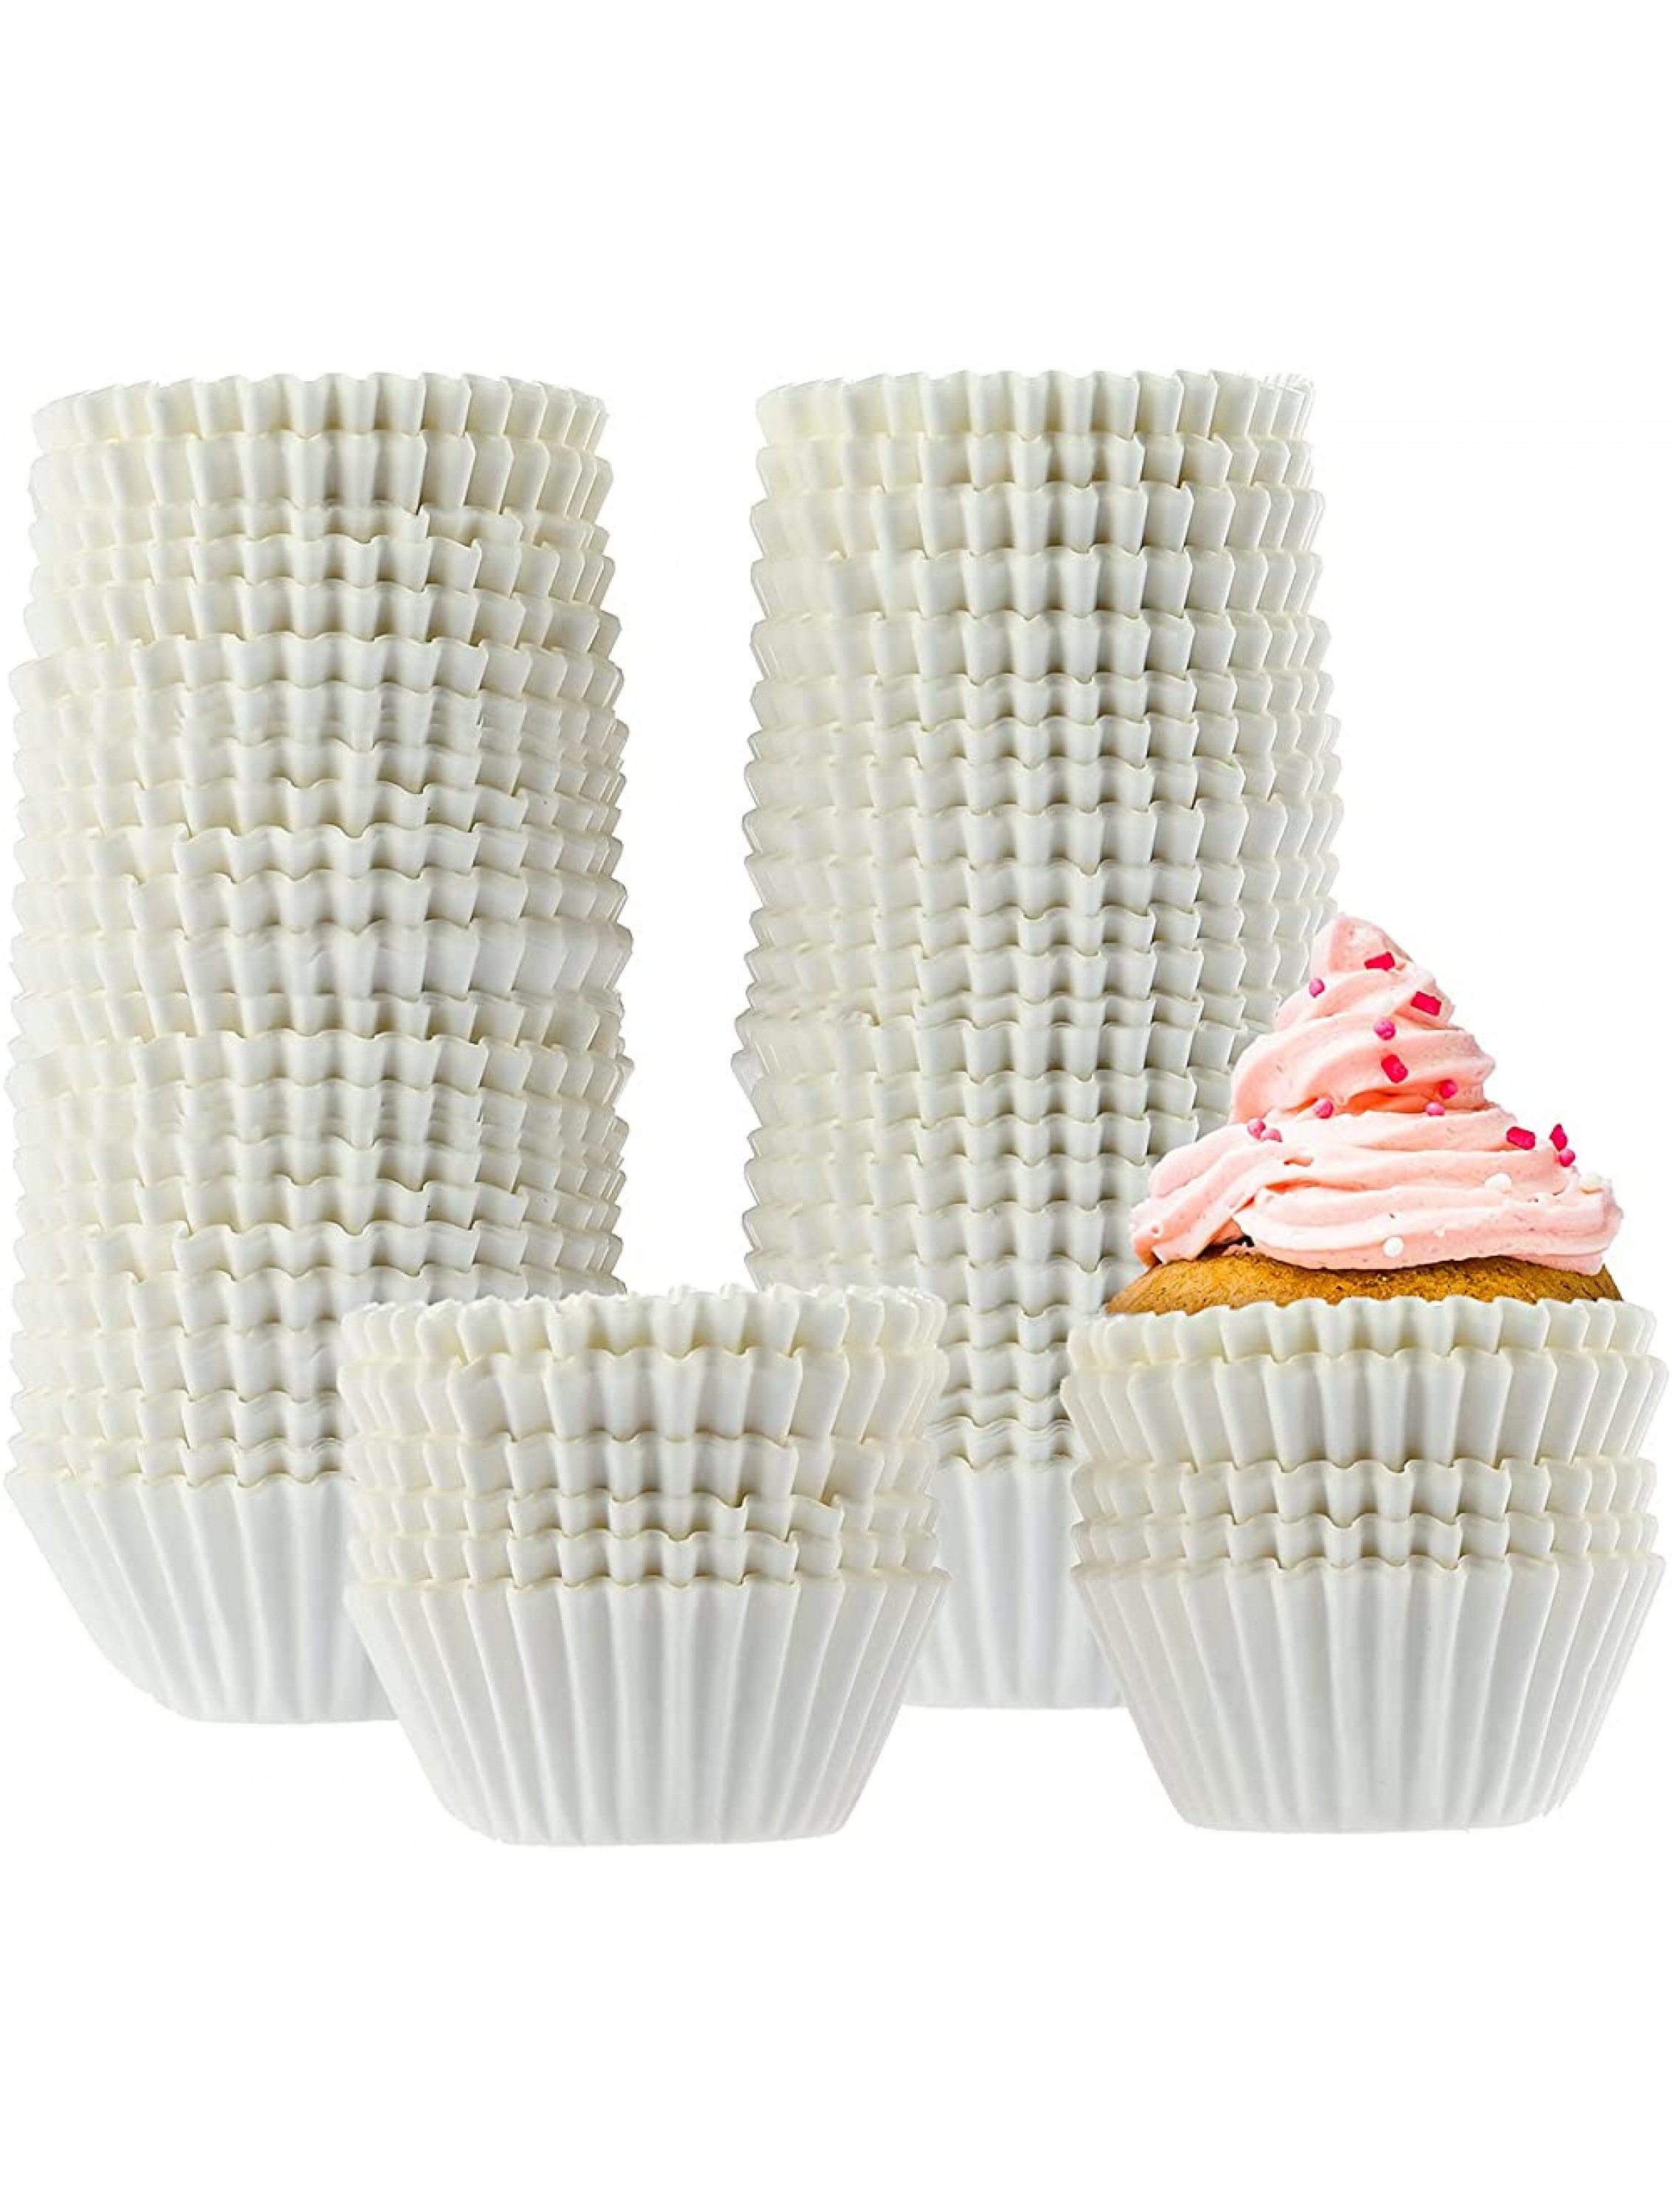 MISAZ 1000 Pieces Mini Baking Cups Paper Liners Chocolate Paper Liners Muffin Cupcake Cake Bakeware Cases Home Kitchen Cake Tools 3 - BSAG2WDAV